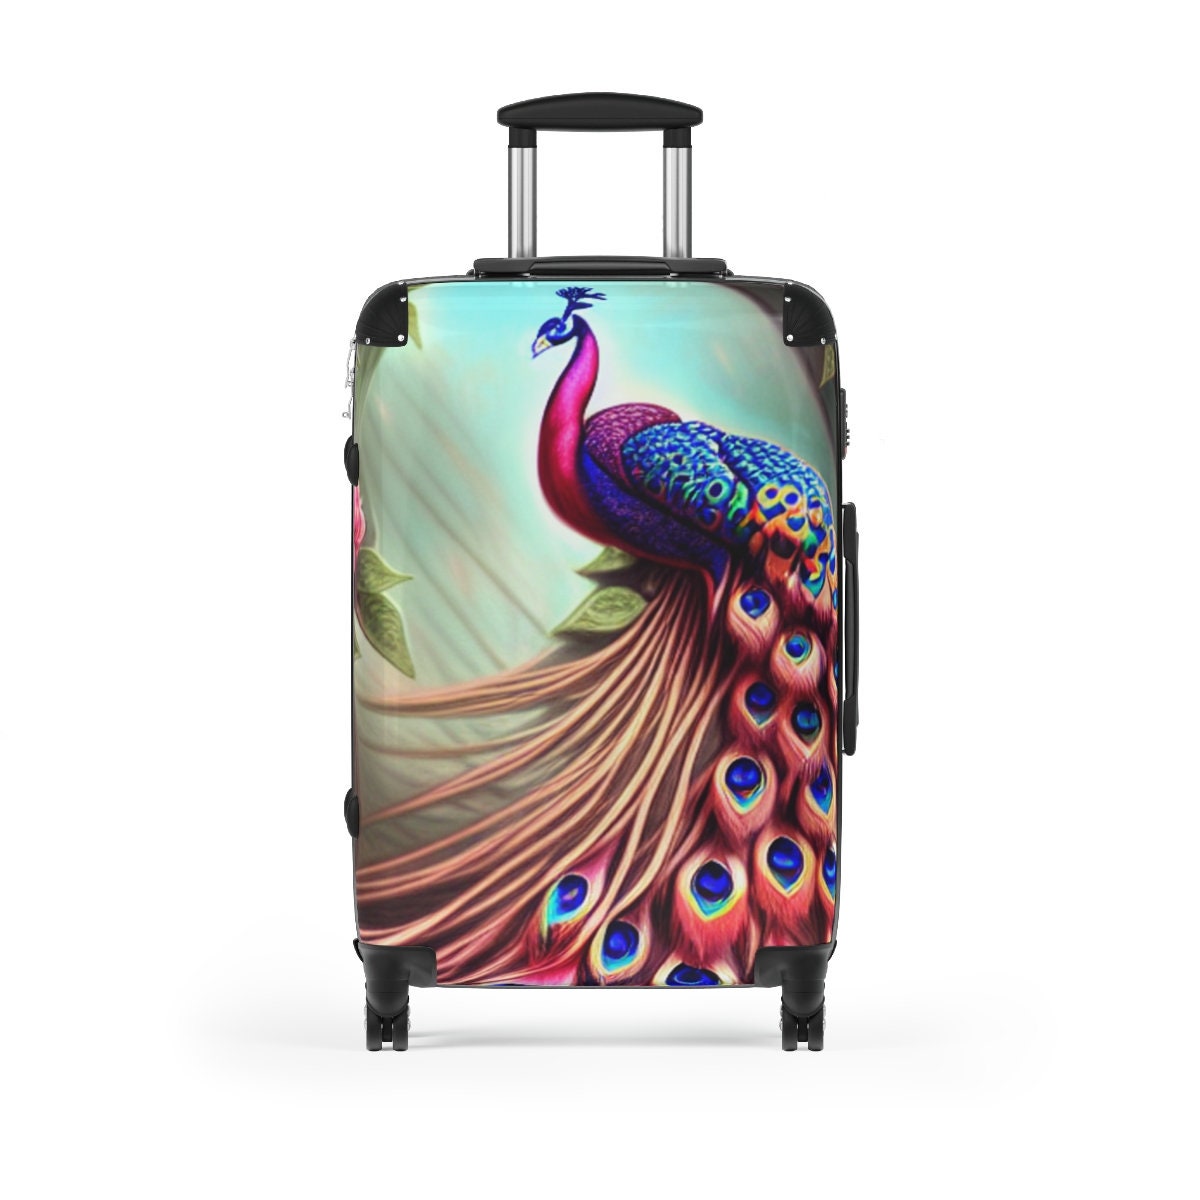 Gorgeous Peacock Vacation Suitcase